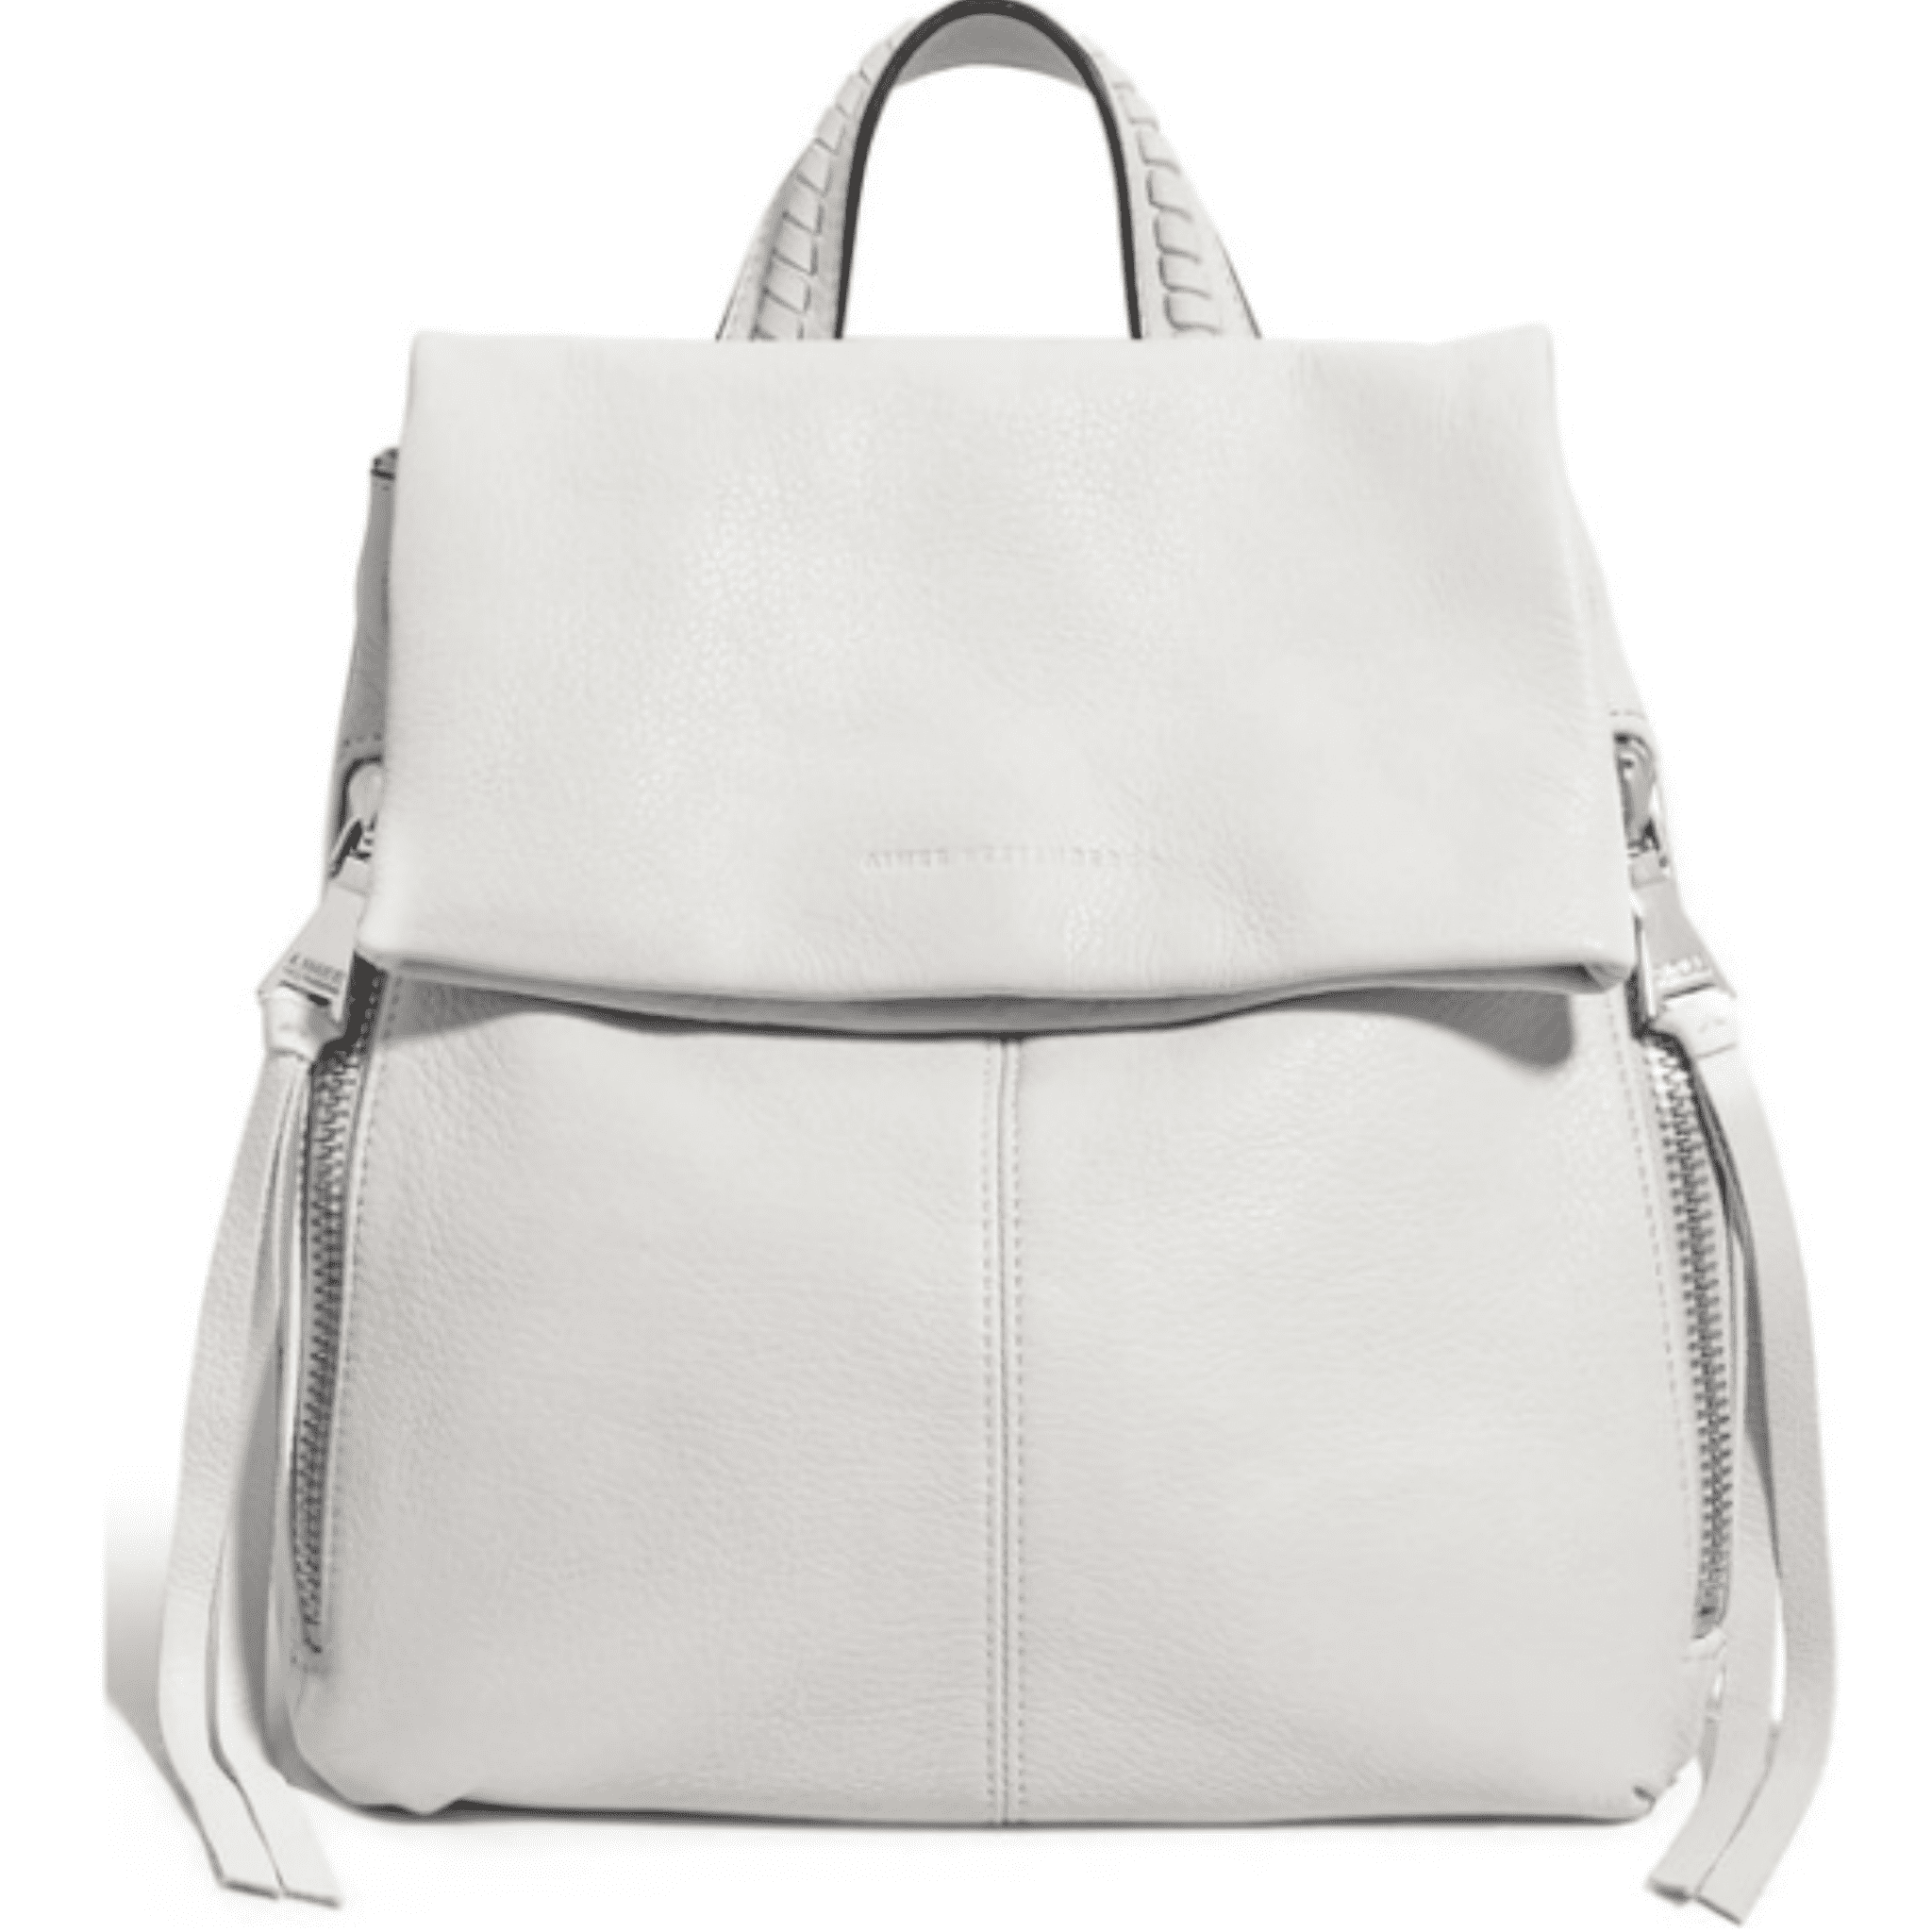 White faux leather backpack